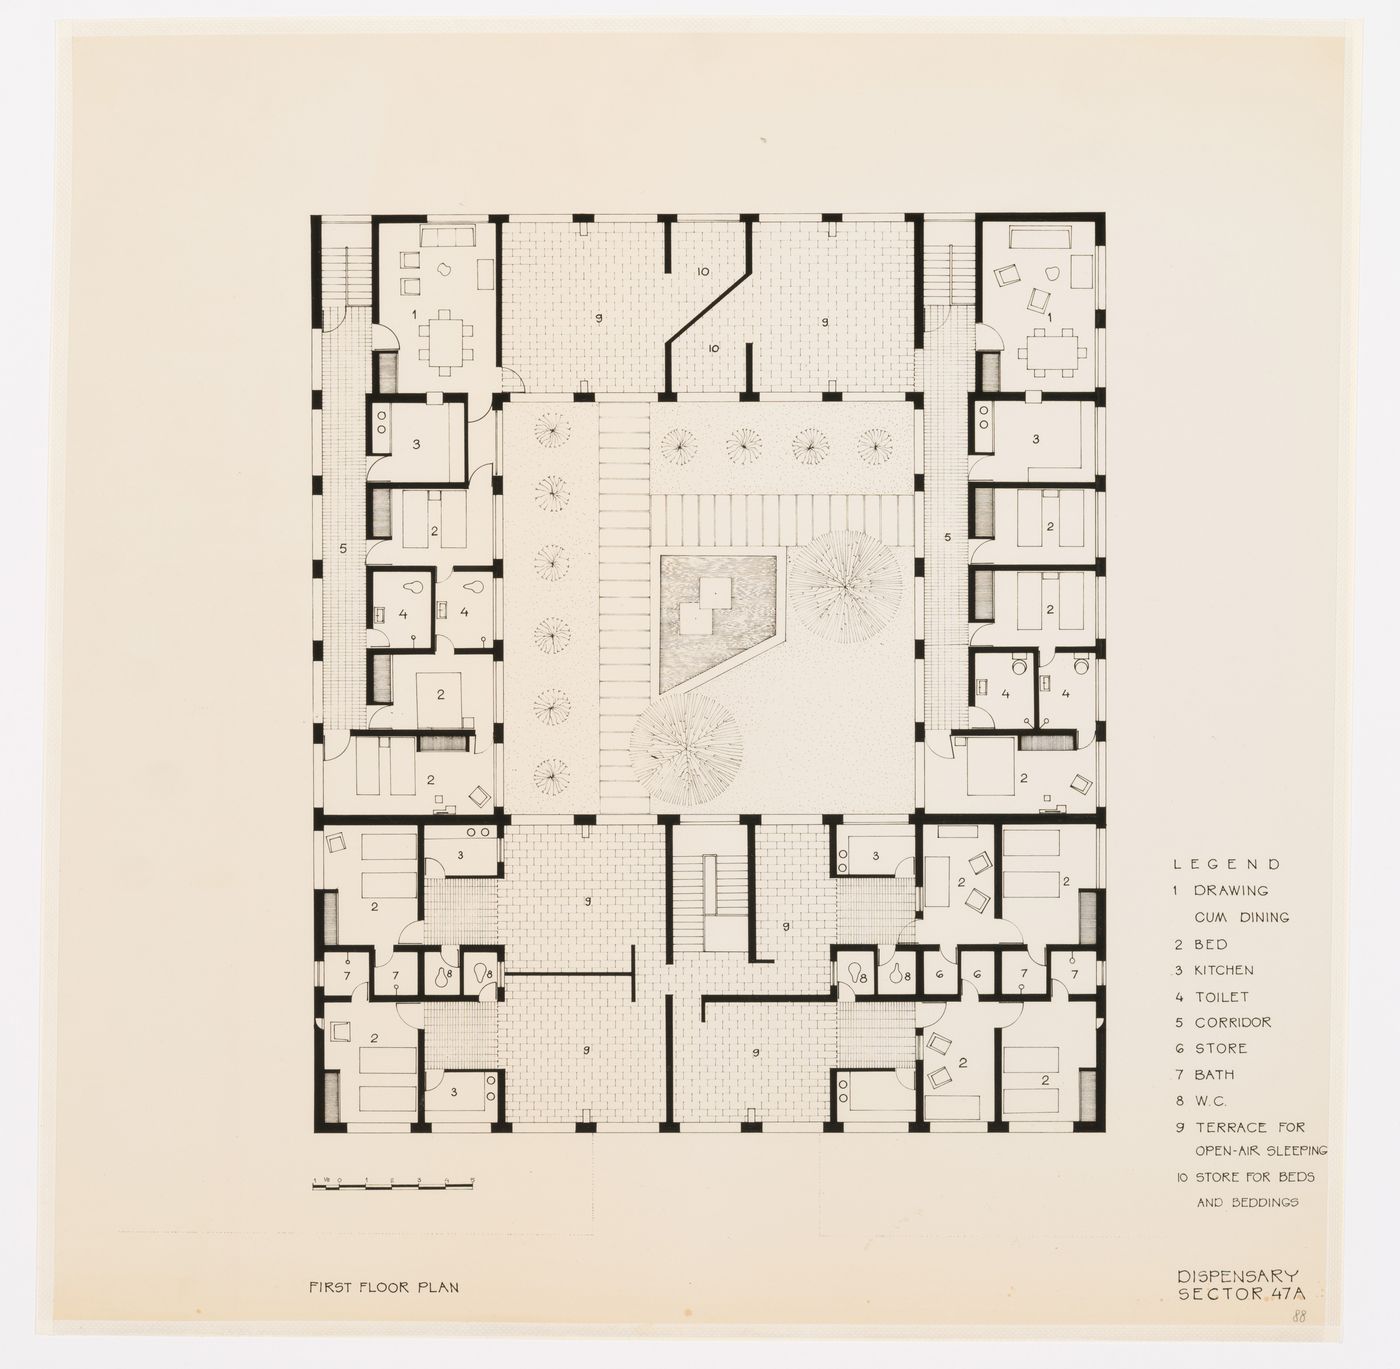 First floor plan for the Dispensary in sector 47-A in Chandigarh, India